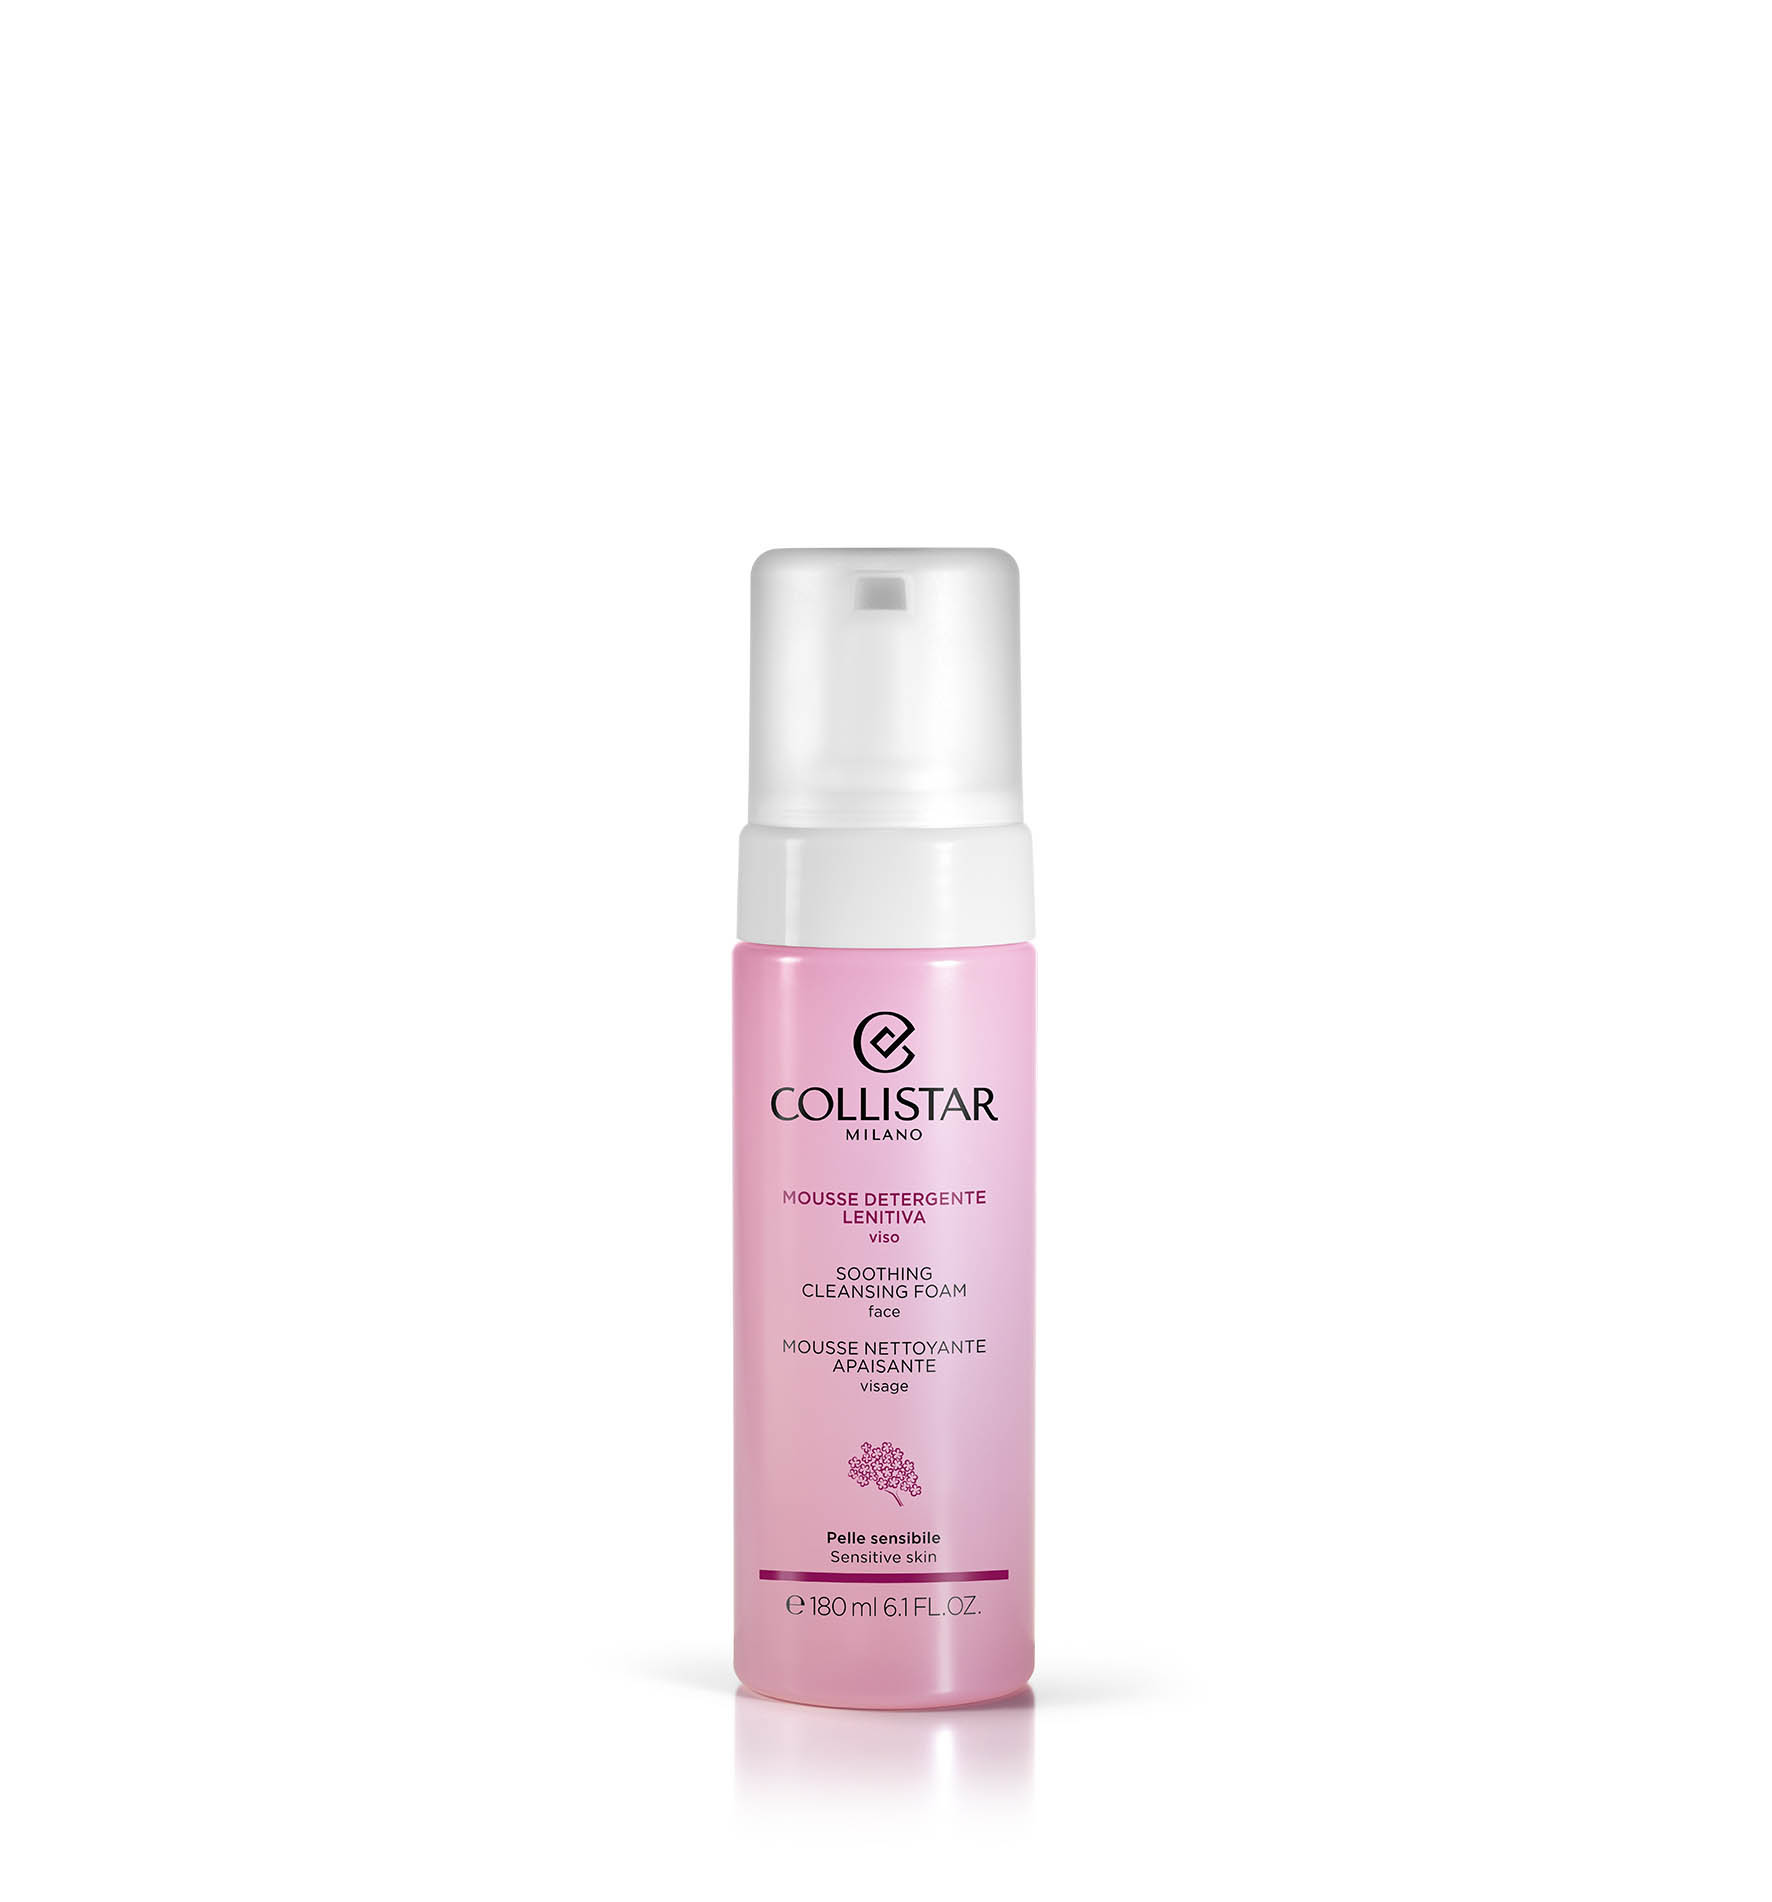 SOOTHING CLEANSING FOAM FACE | Collistar - Shop Online Ufficiale